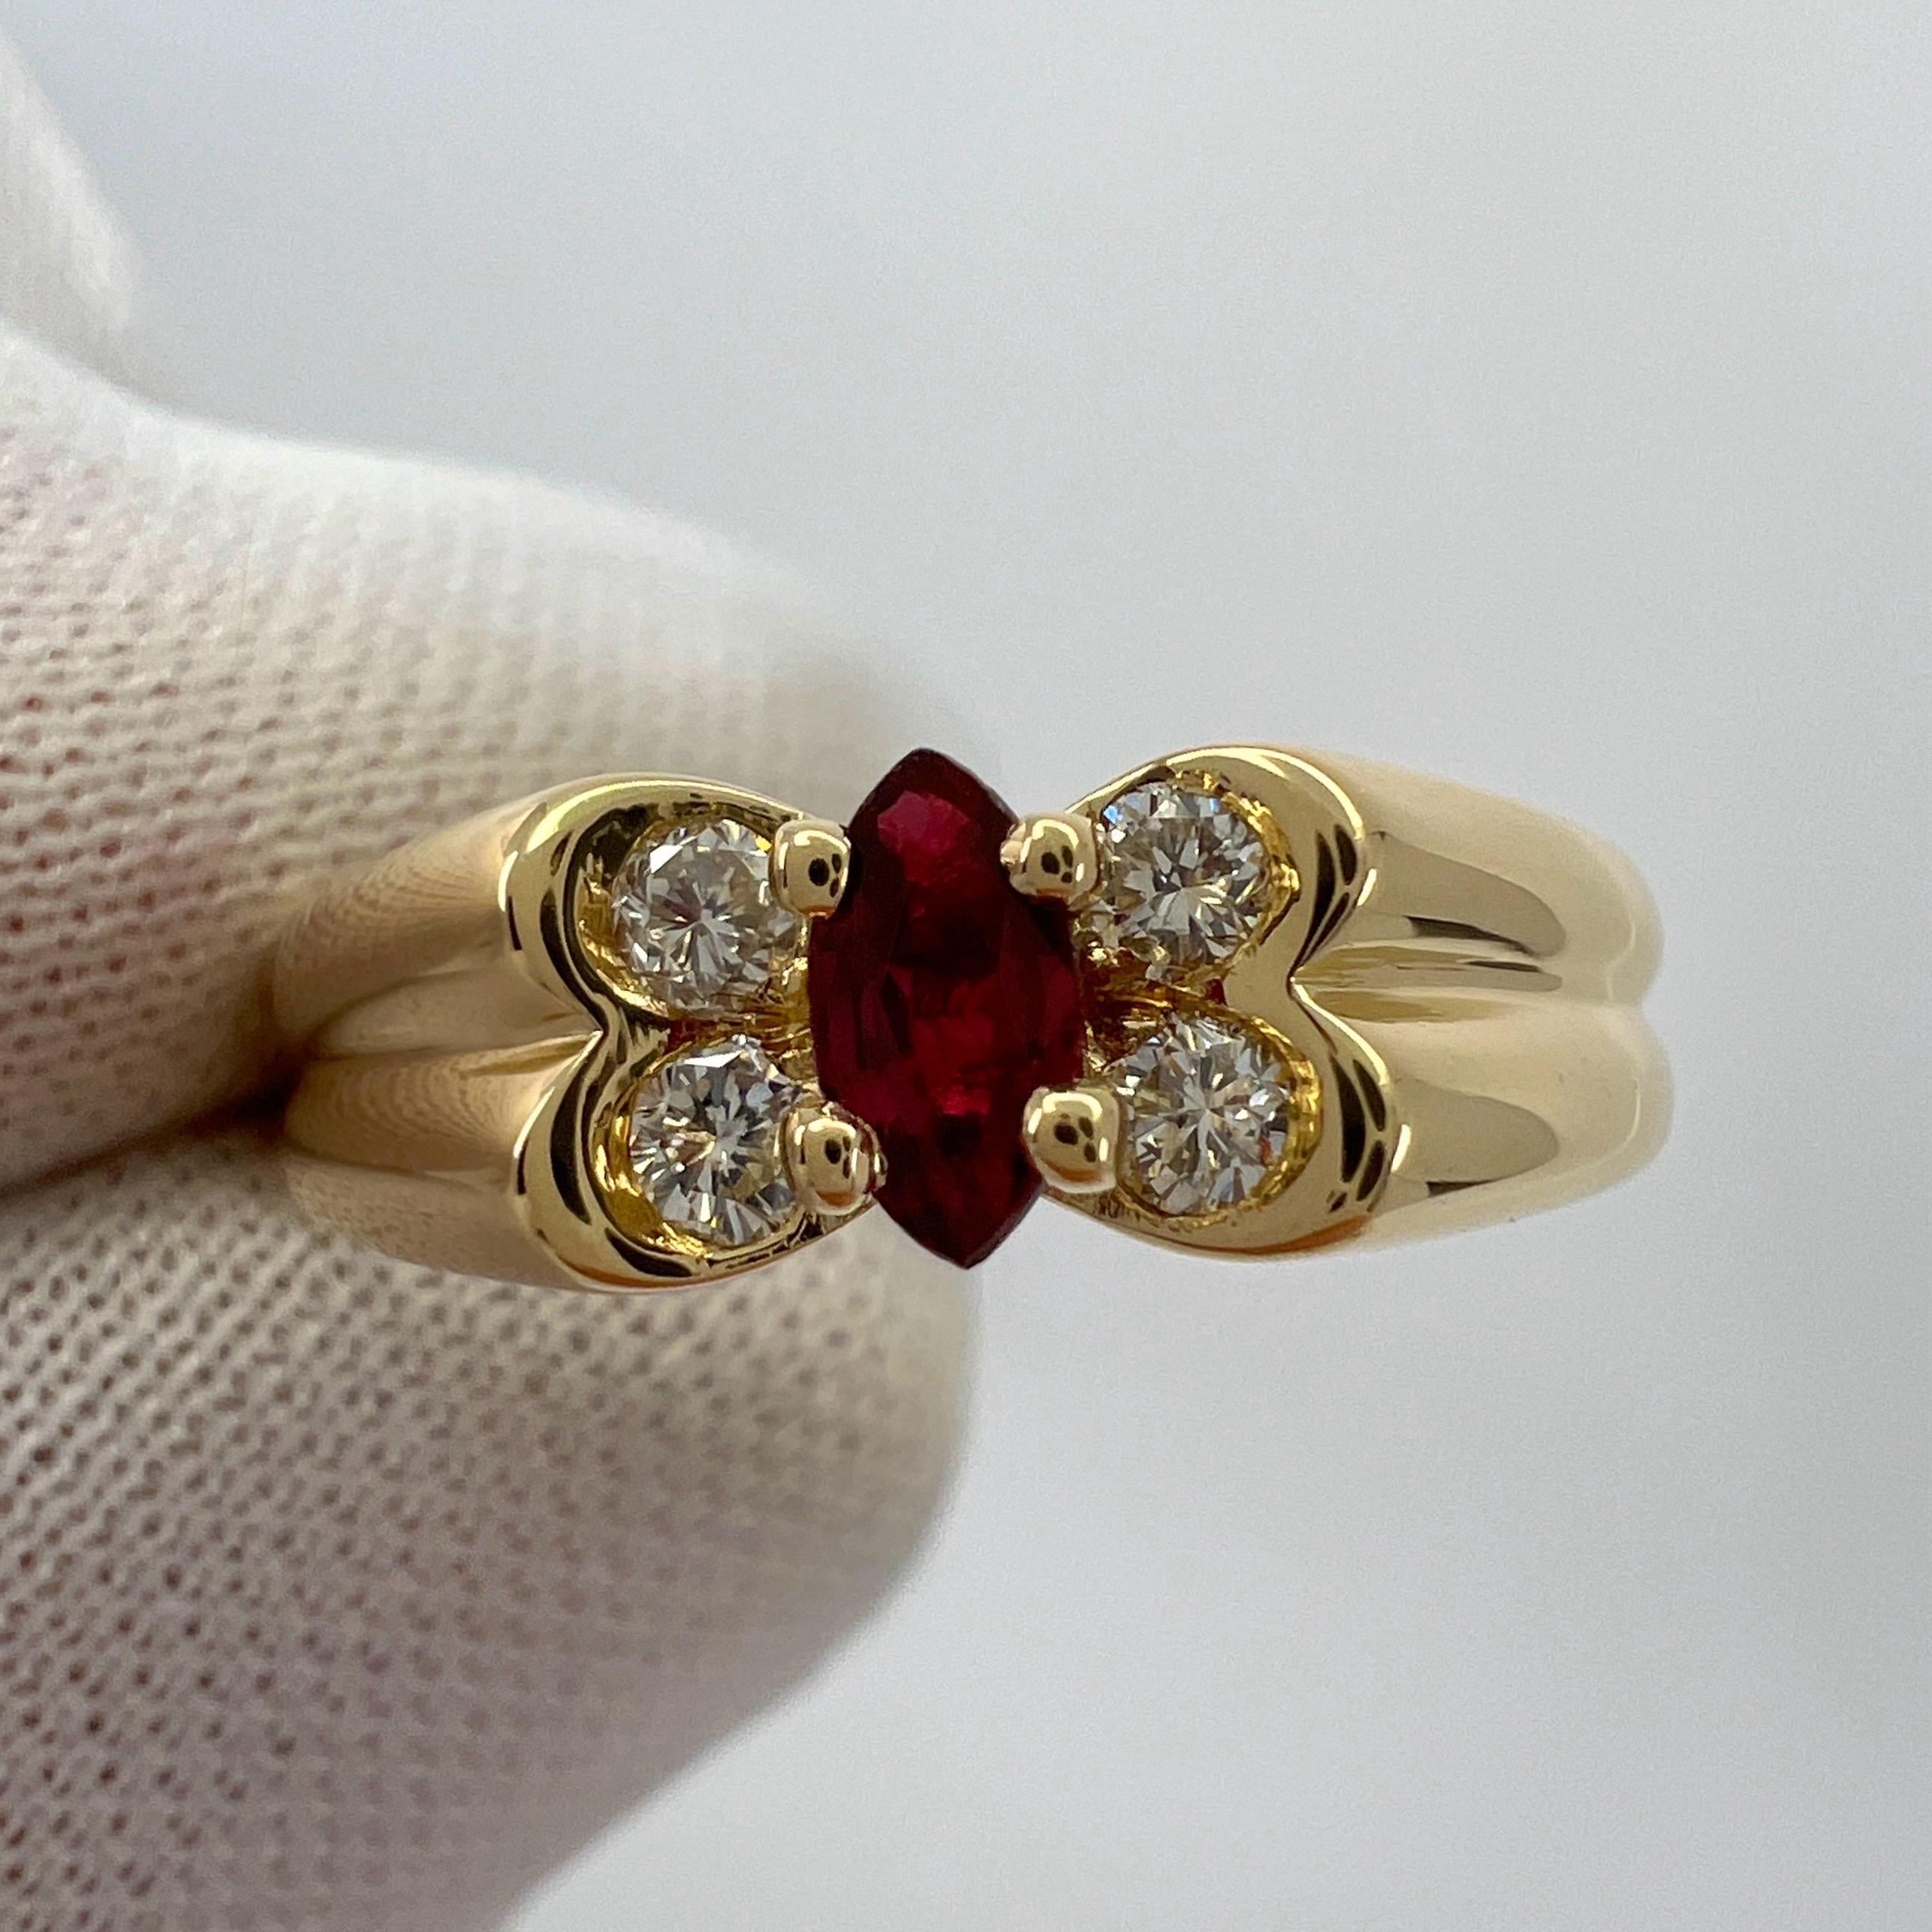 Vintage Van Cleef & Arpels Fine Ruby And Diamond 18k Yellow Gold Ring.

A stunning vintage ring with a unique design typical of Van Cleef & Arpels, set with a beautiful marquise cut fine vivid red ruby measuring just under 5x2.9mm and accented by x4